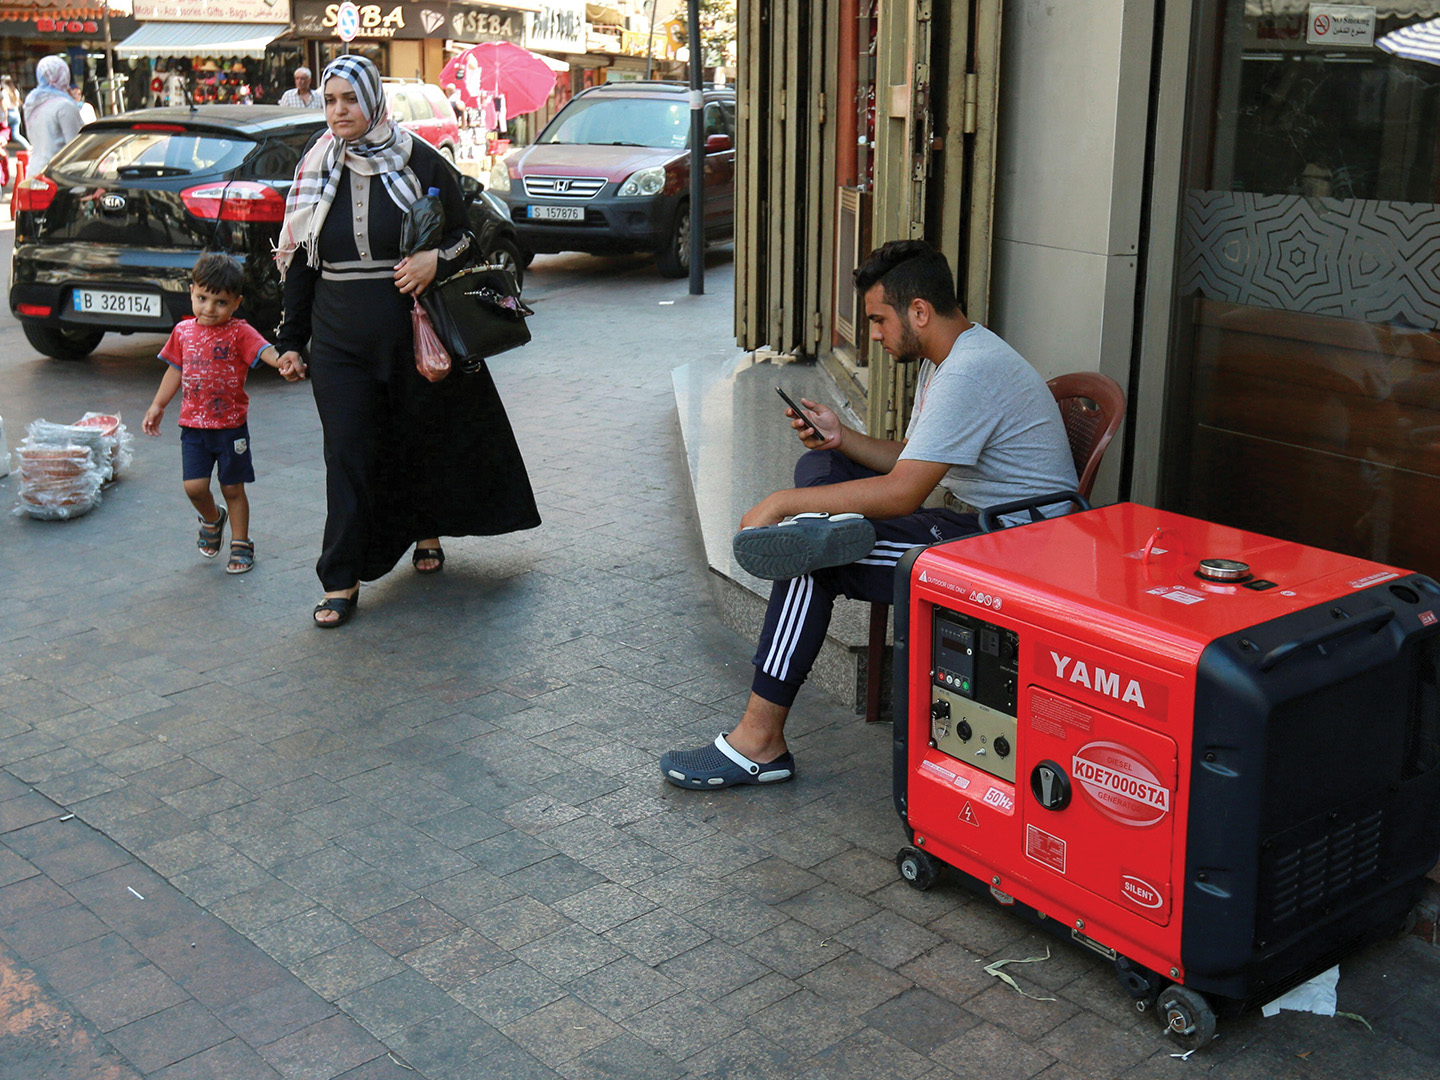 A business in Sidon, Lebanon uses a portable generator to compensate for the ongoing power outages, August 2021.